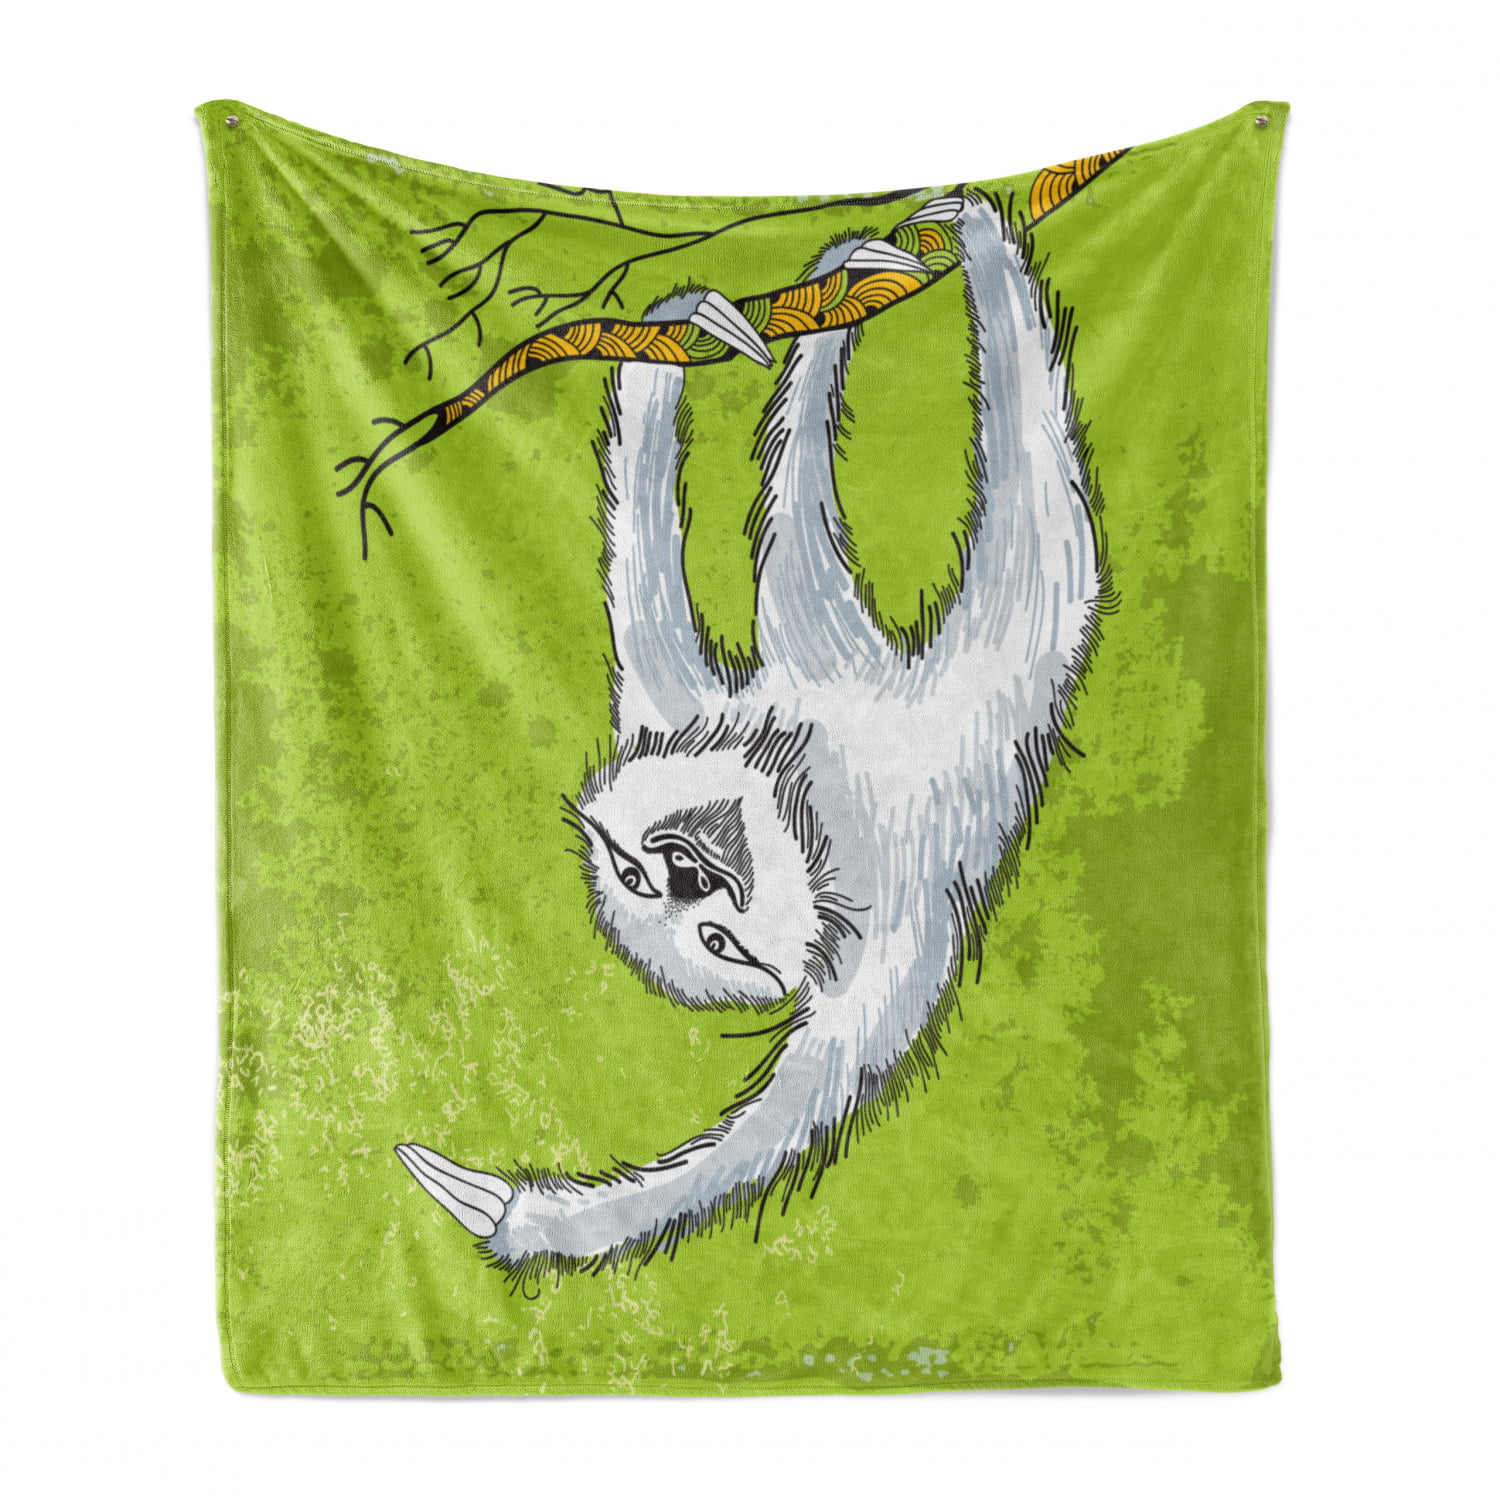 Funny and Cute Smiling Three-Toed Sloth Ultra-Soft Micro Fleece Blanket 60x50 Warm Comfortable Fuzzy Flannel Throw Blanket All Season Bed Soft Living Room Dorm